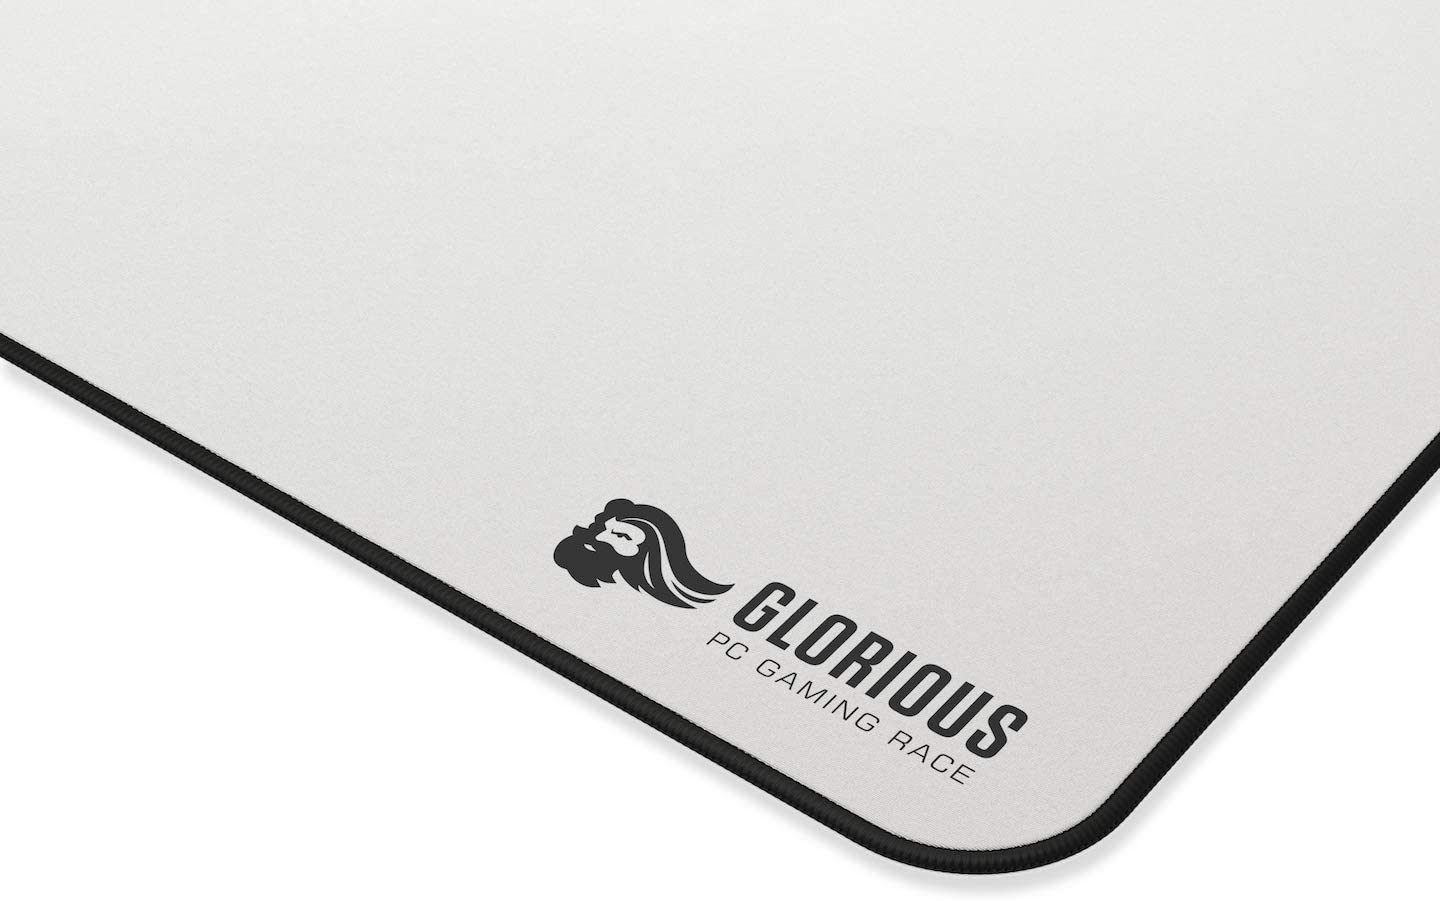 Glorious XL Gaming Mouse Pad – White